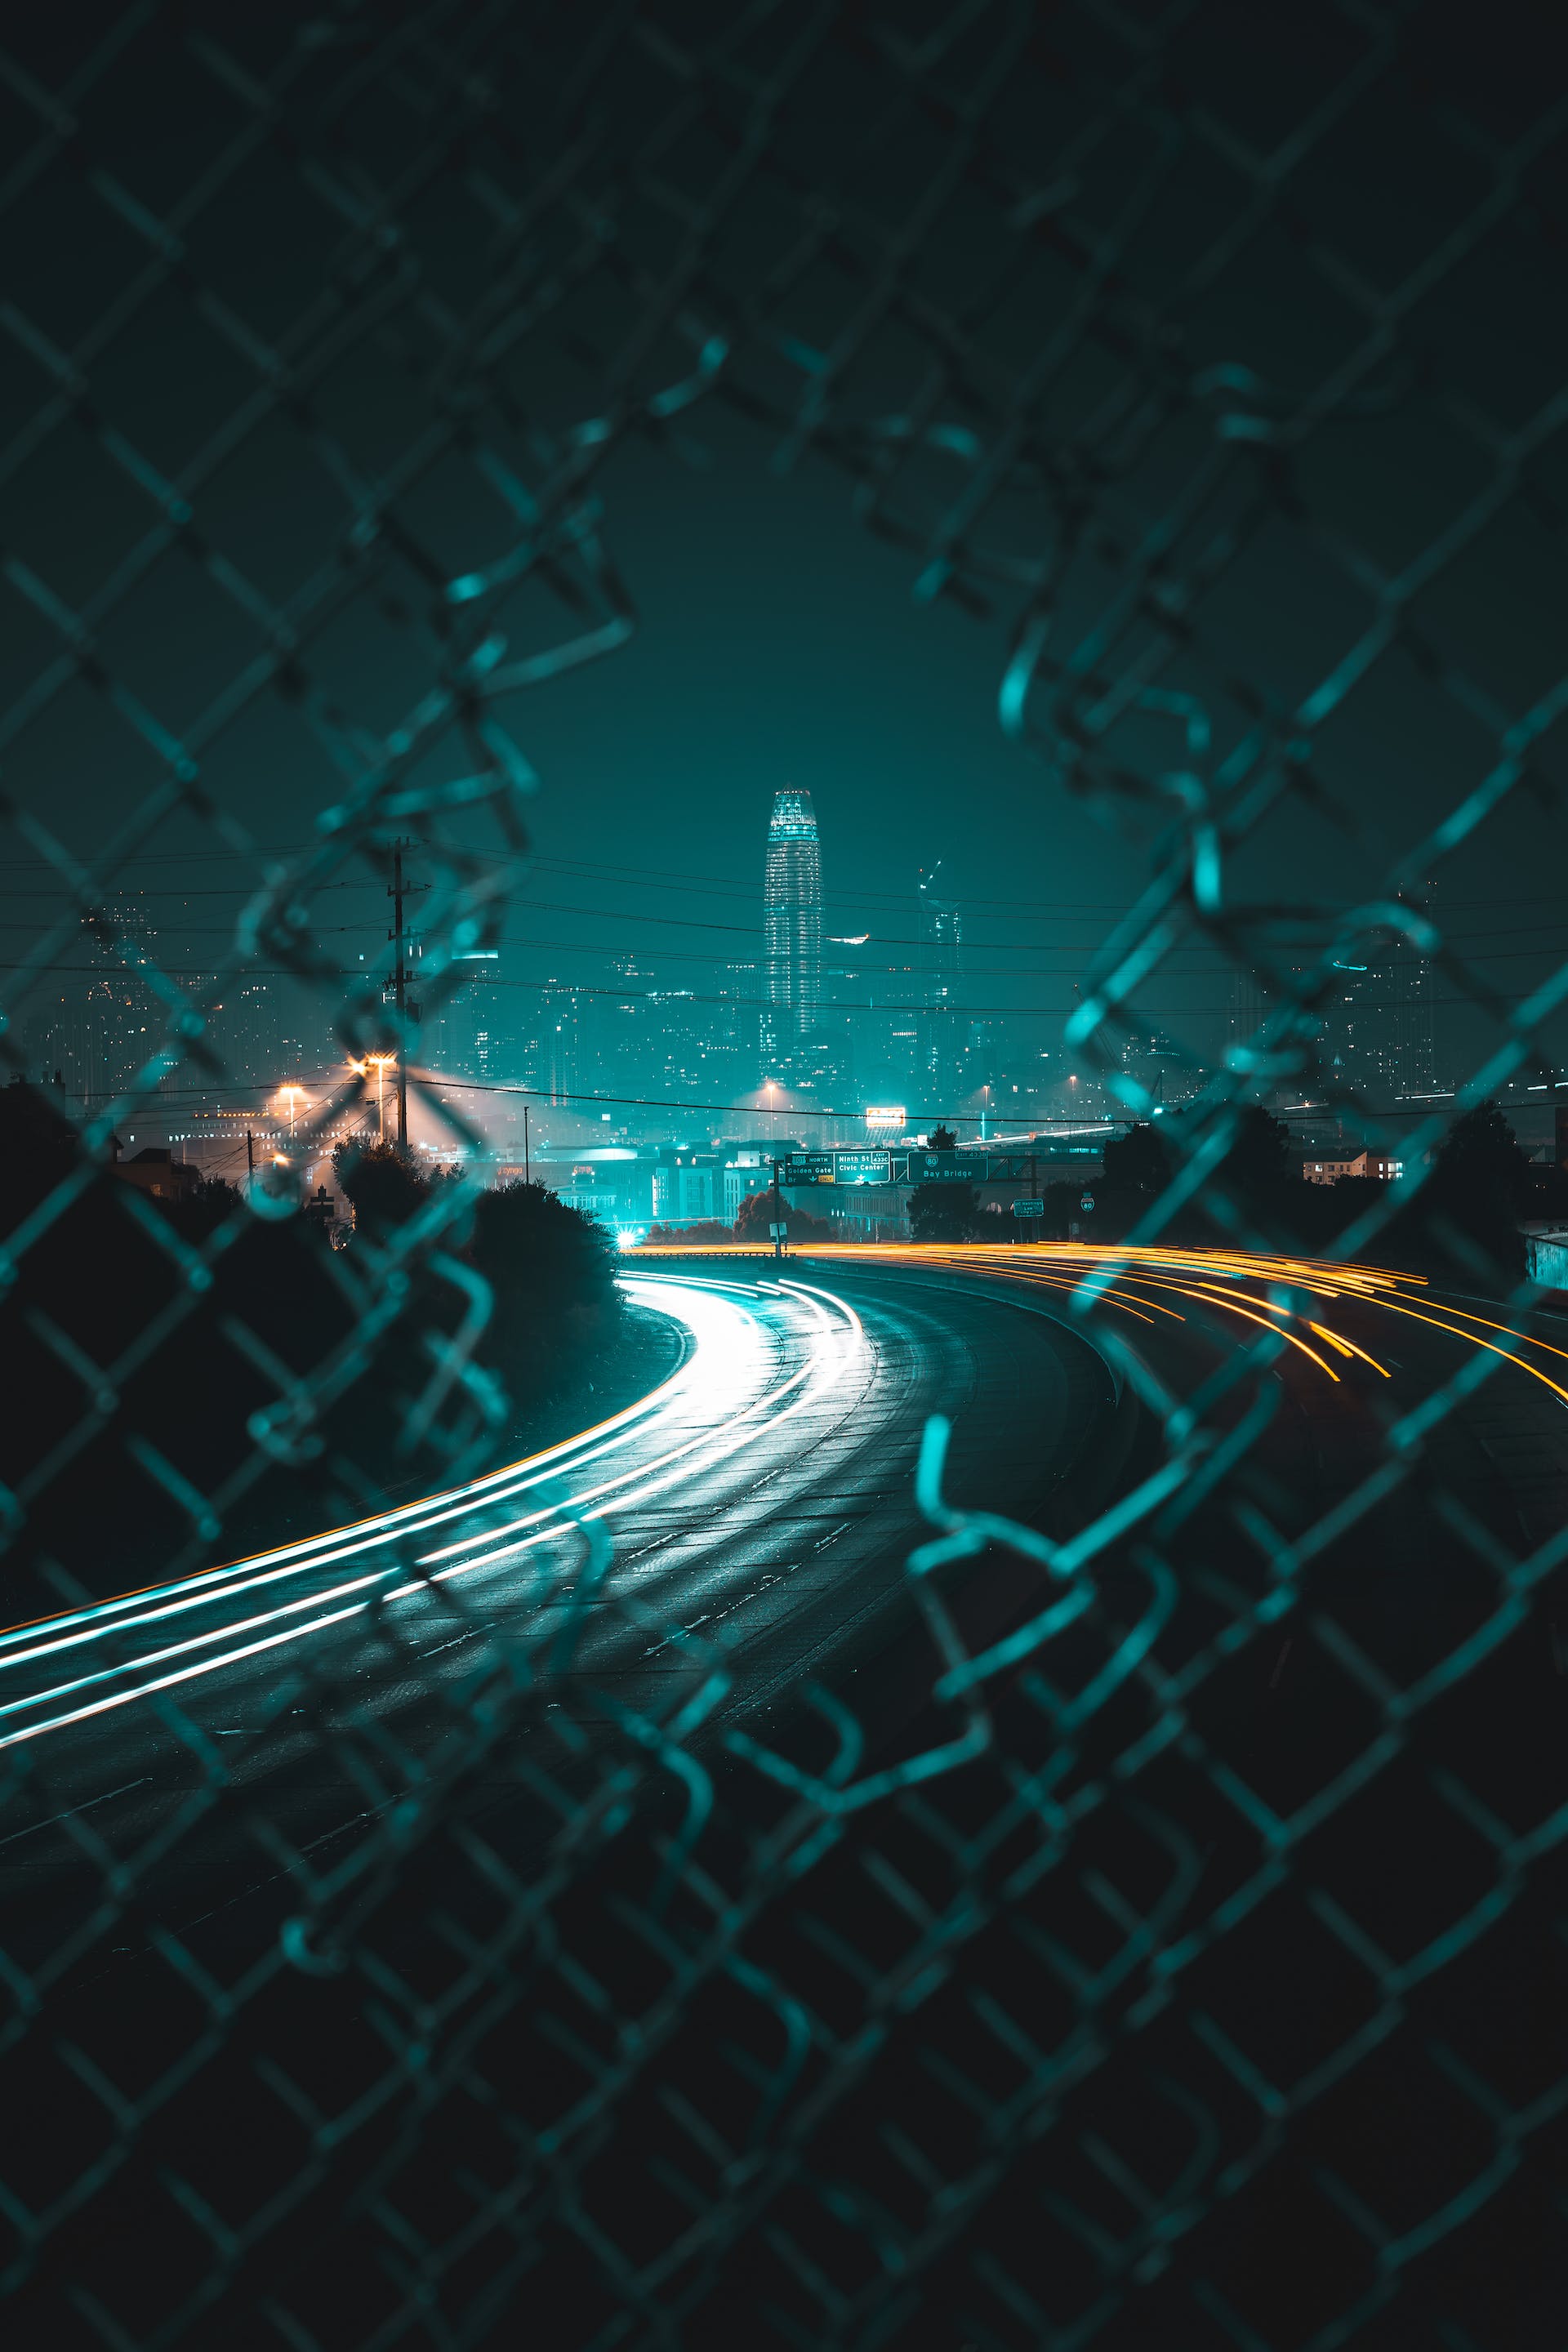 Image of the San Francisco skyline as seen through a hold in a chain link fence